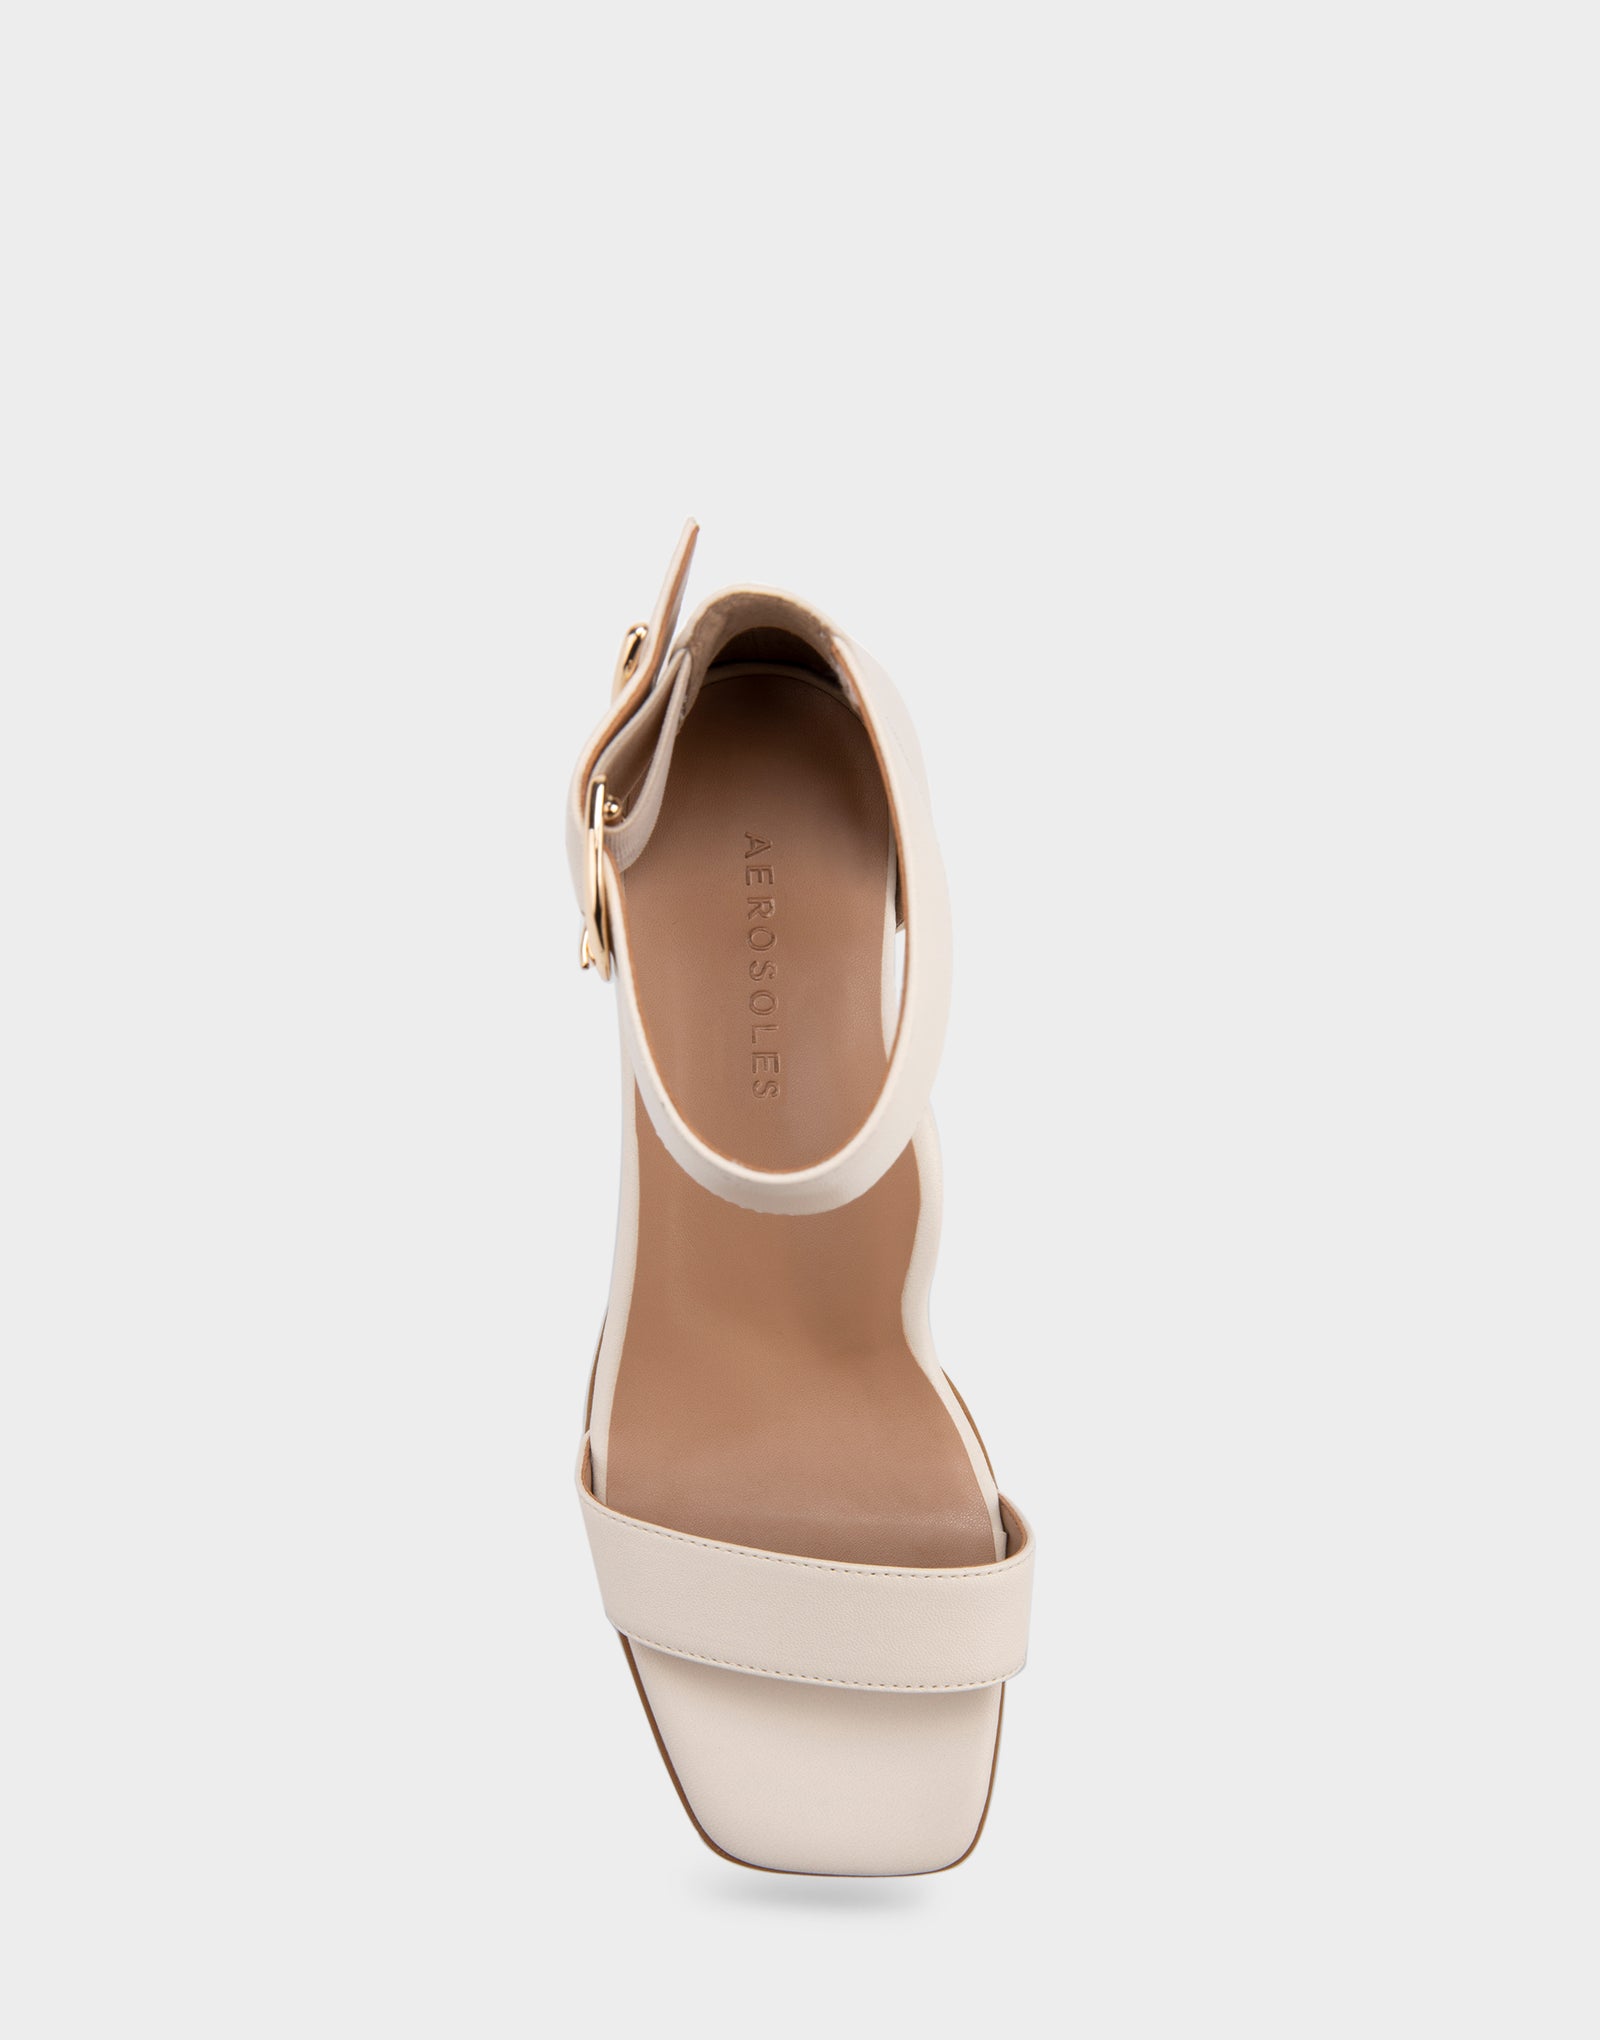 Eliza White Genuine Leather Two Piece Mid Heel with Ankle Strap